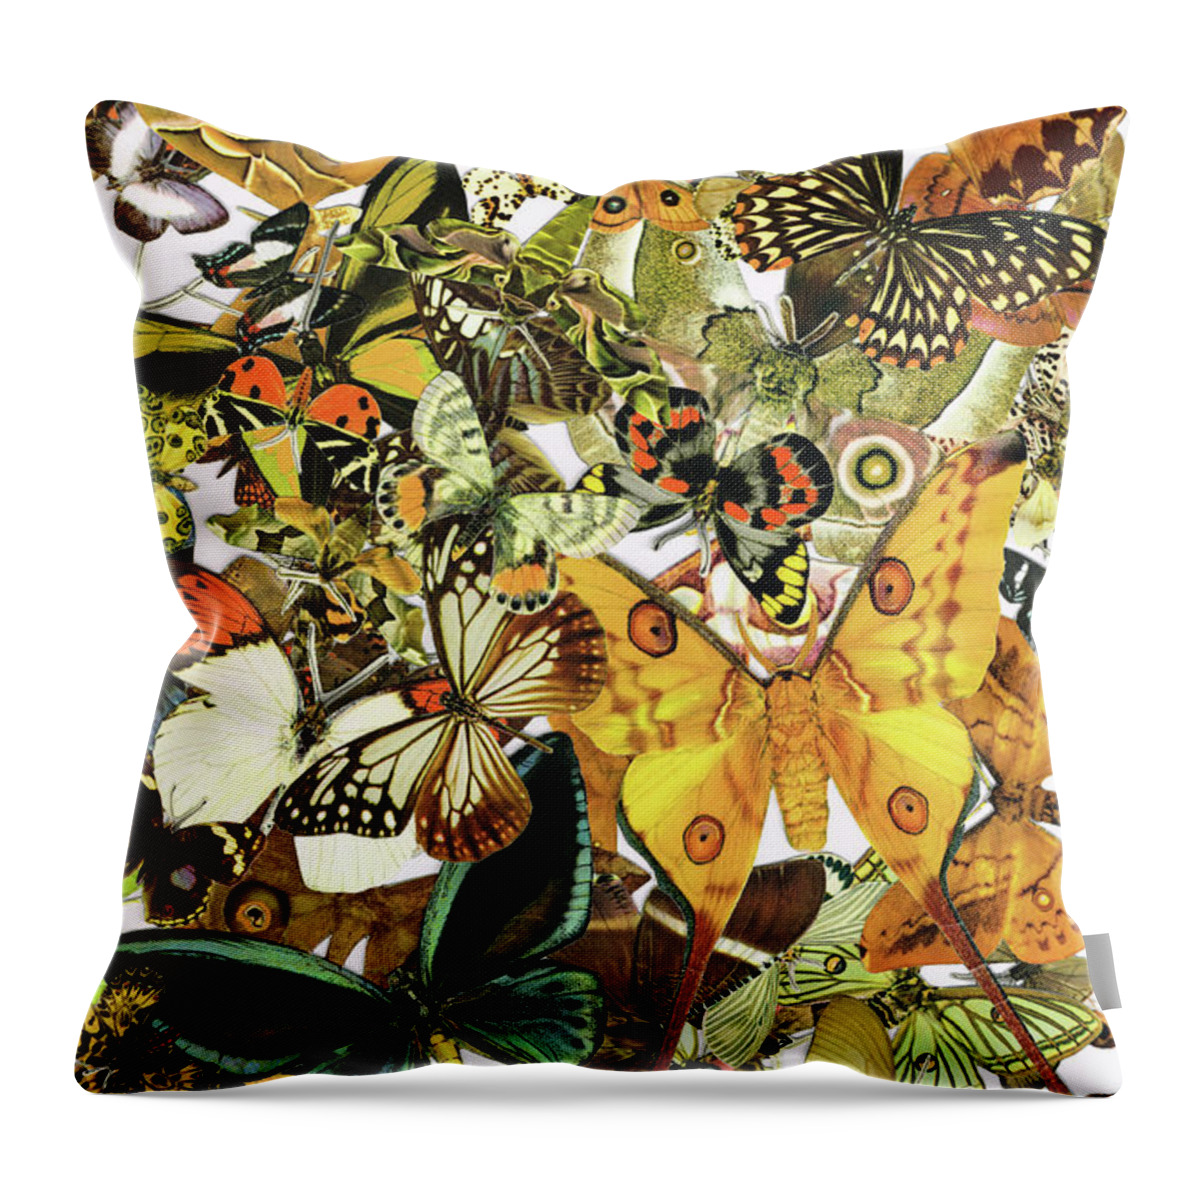 Butterfly Throw Pillow featuring the painting Vintage Butterfly Art - Butterflies Galore - Sharon Cummings by Sharon Cummings